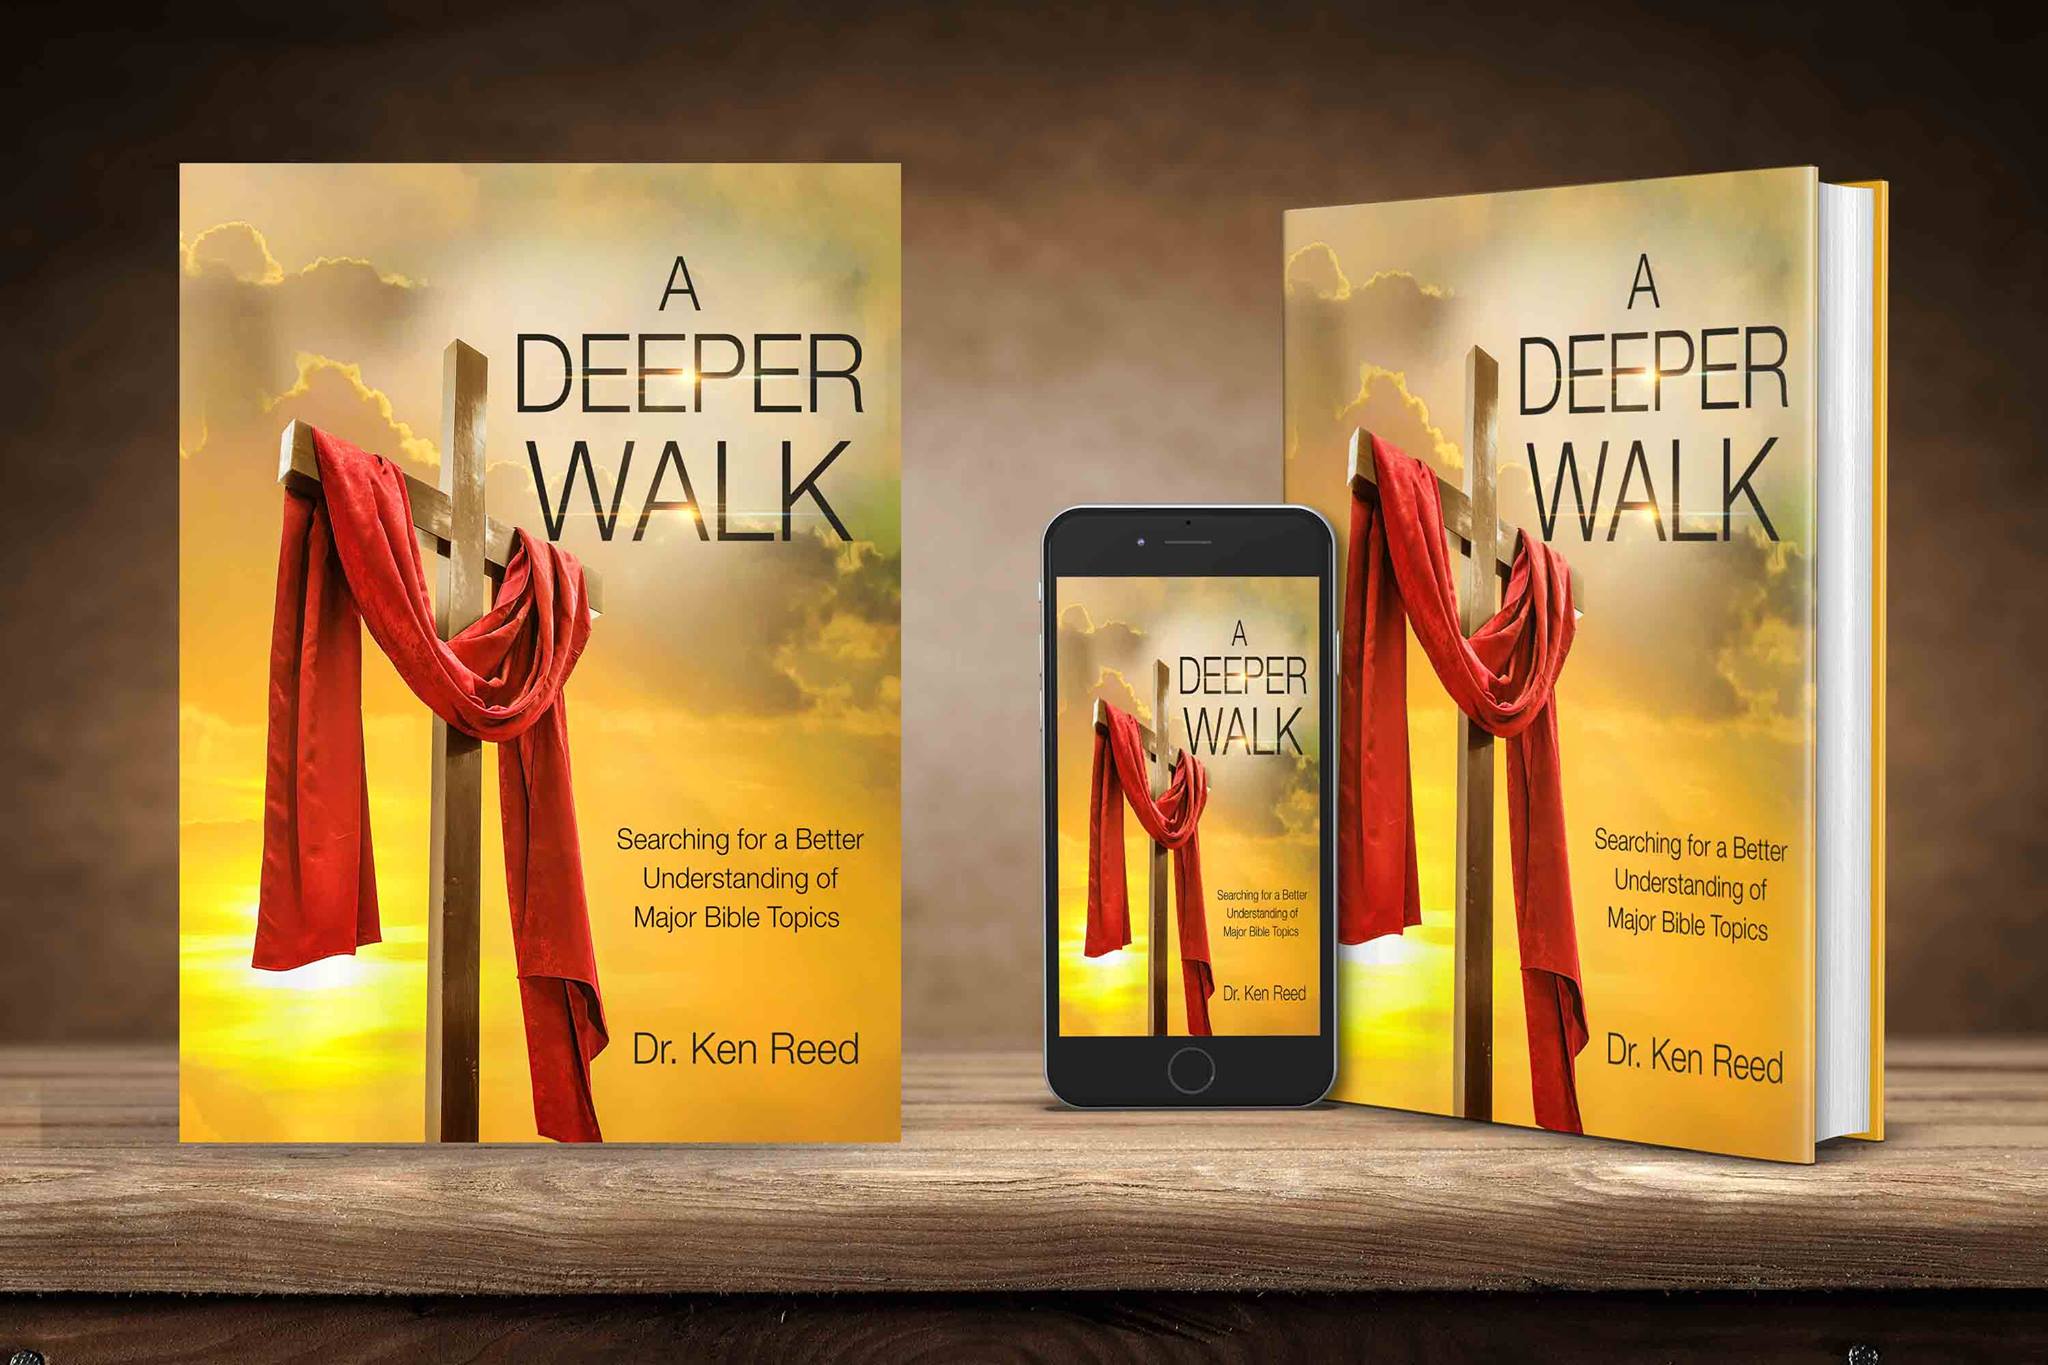 A DEEPER WALK - Searching for a Better Understanding of Major Bible Topics Published by Los Angeles Publisher - Beyond Publishing